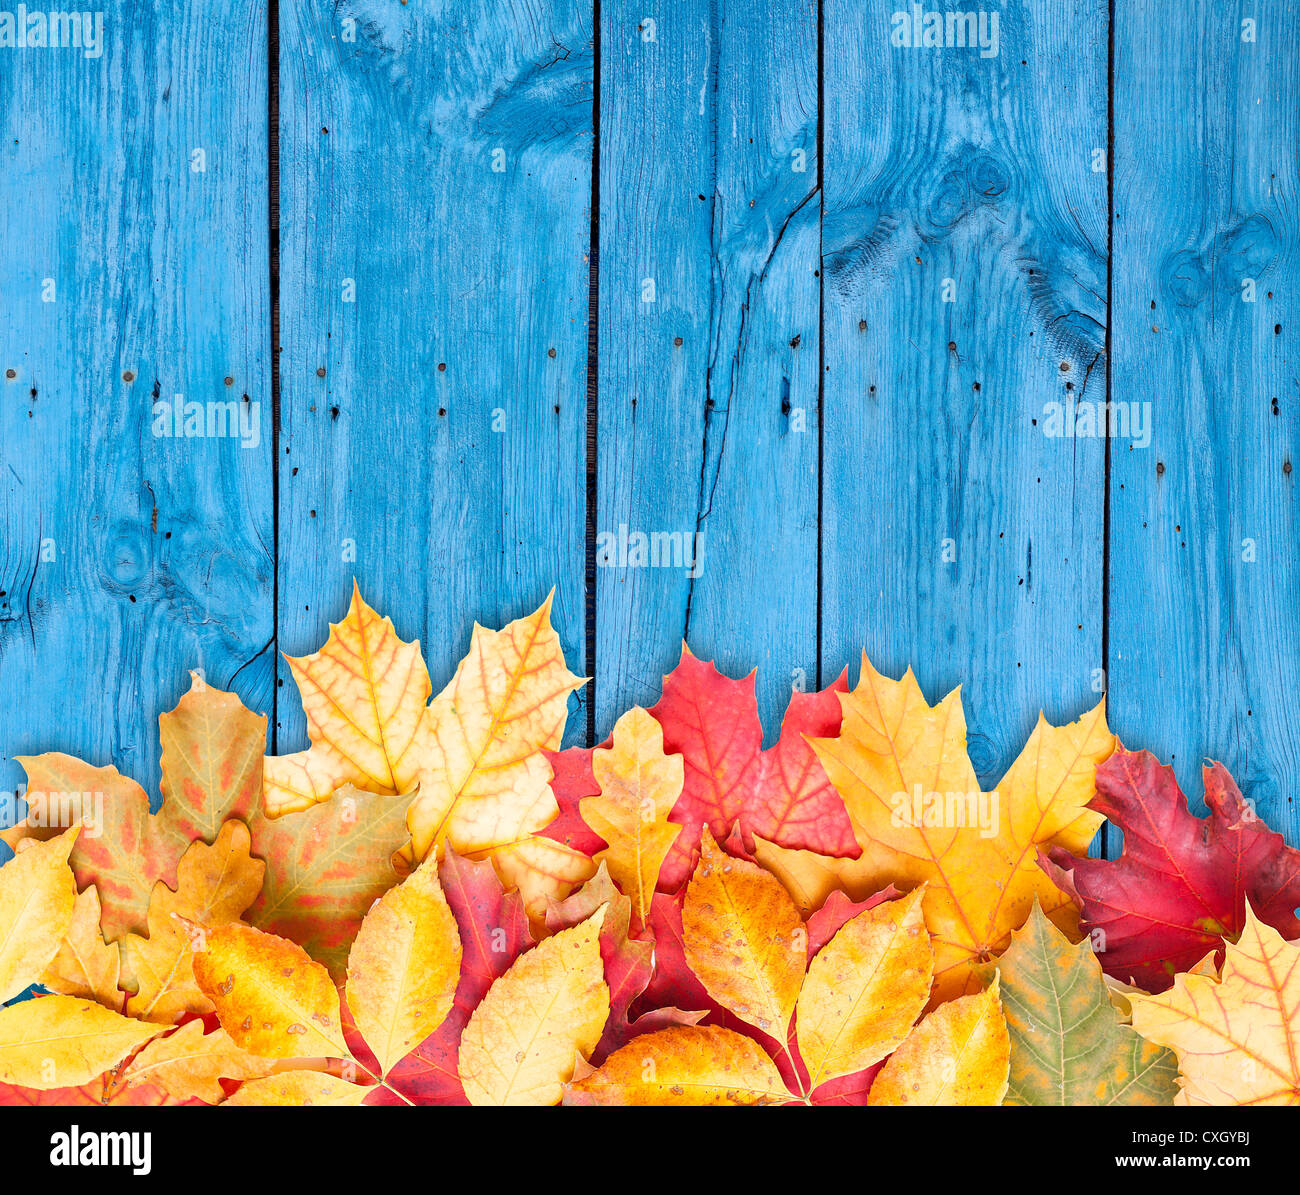 Autumn leaves over wooden background with copy space Stock Photo